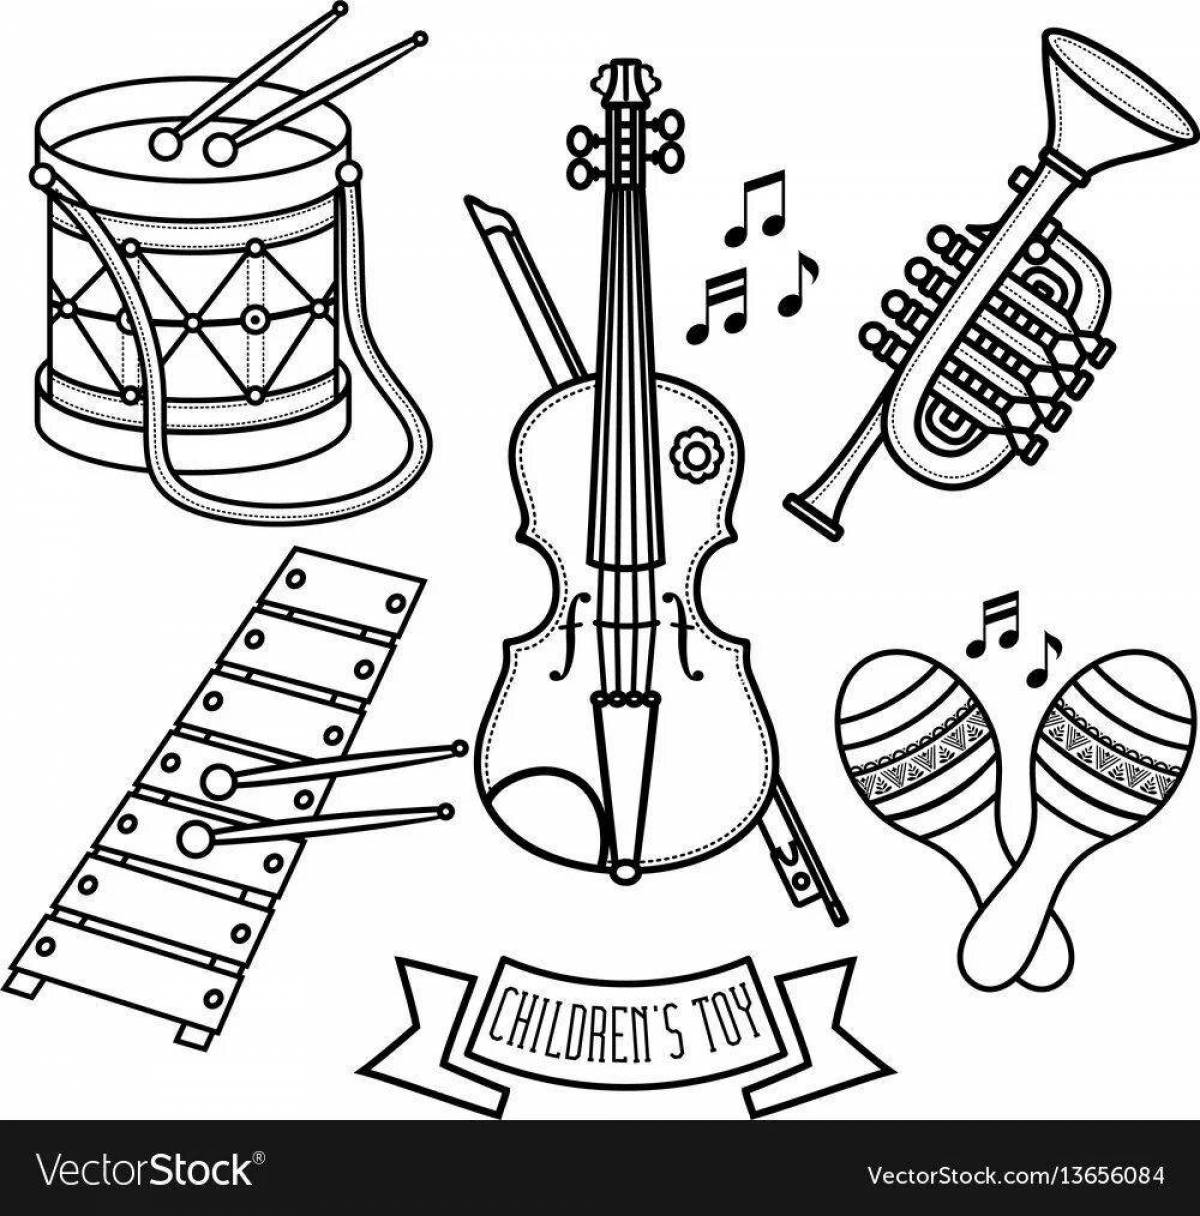 Coloring page inviting musical instruments